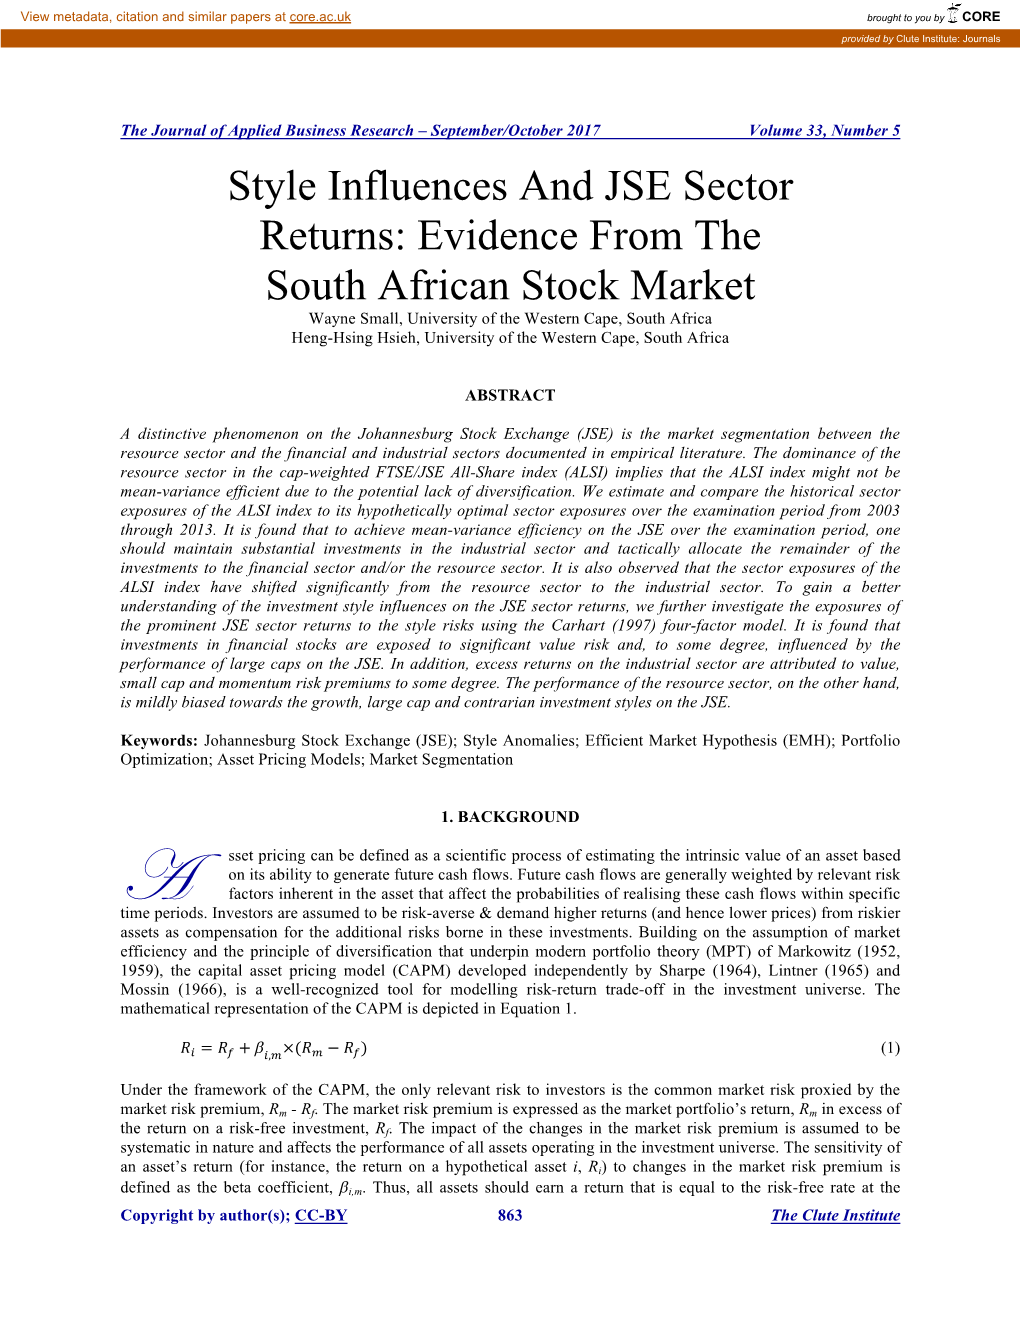 Style Influences and JSE Sector Returns: Evidence from the South